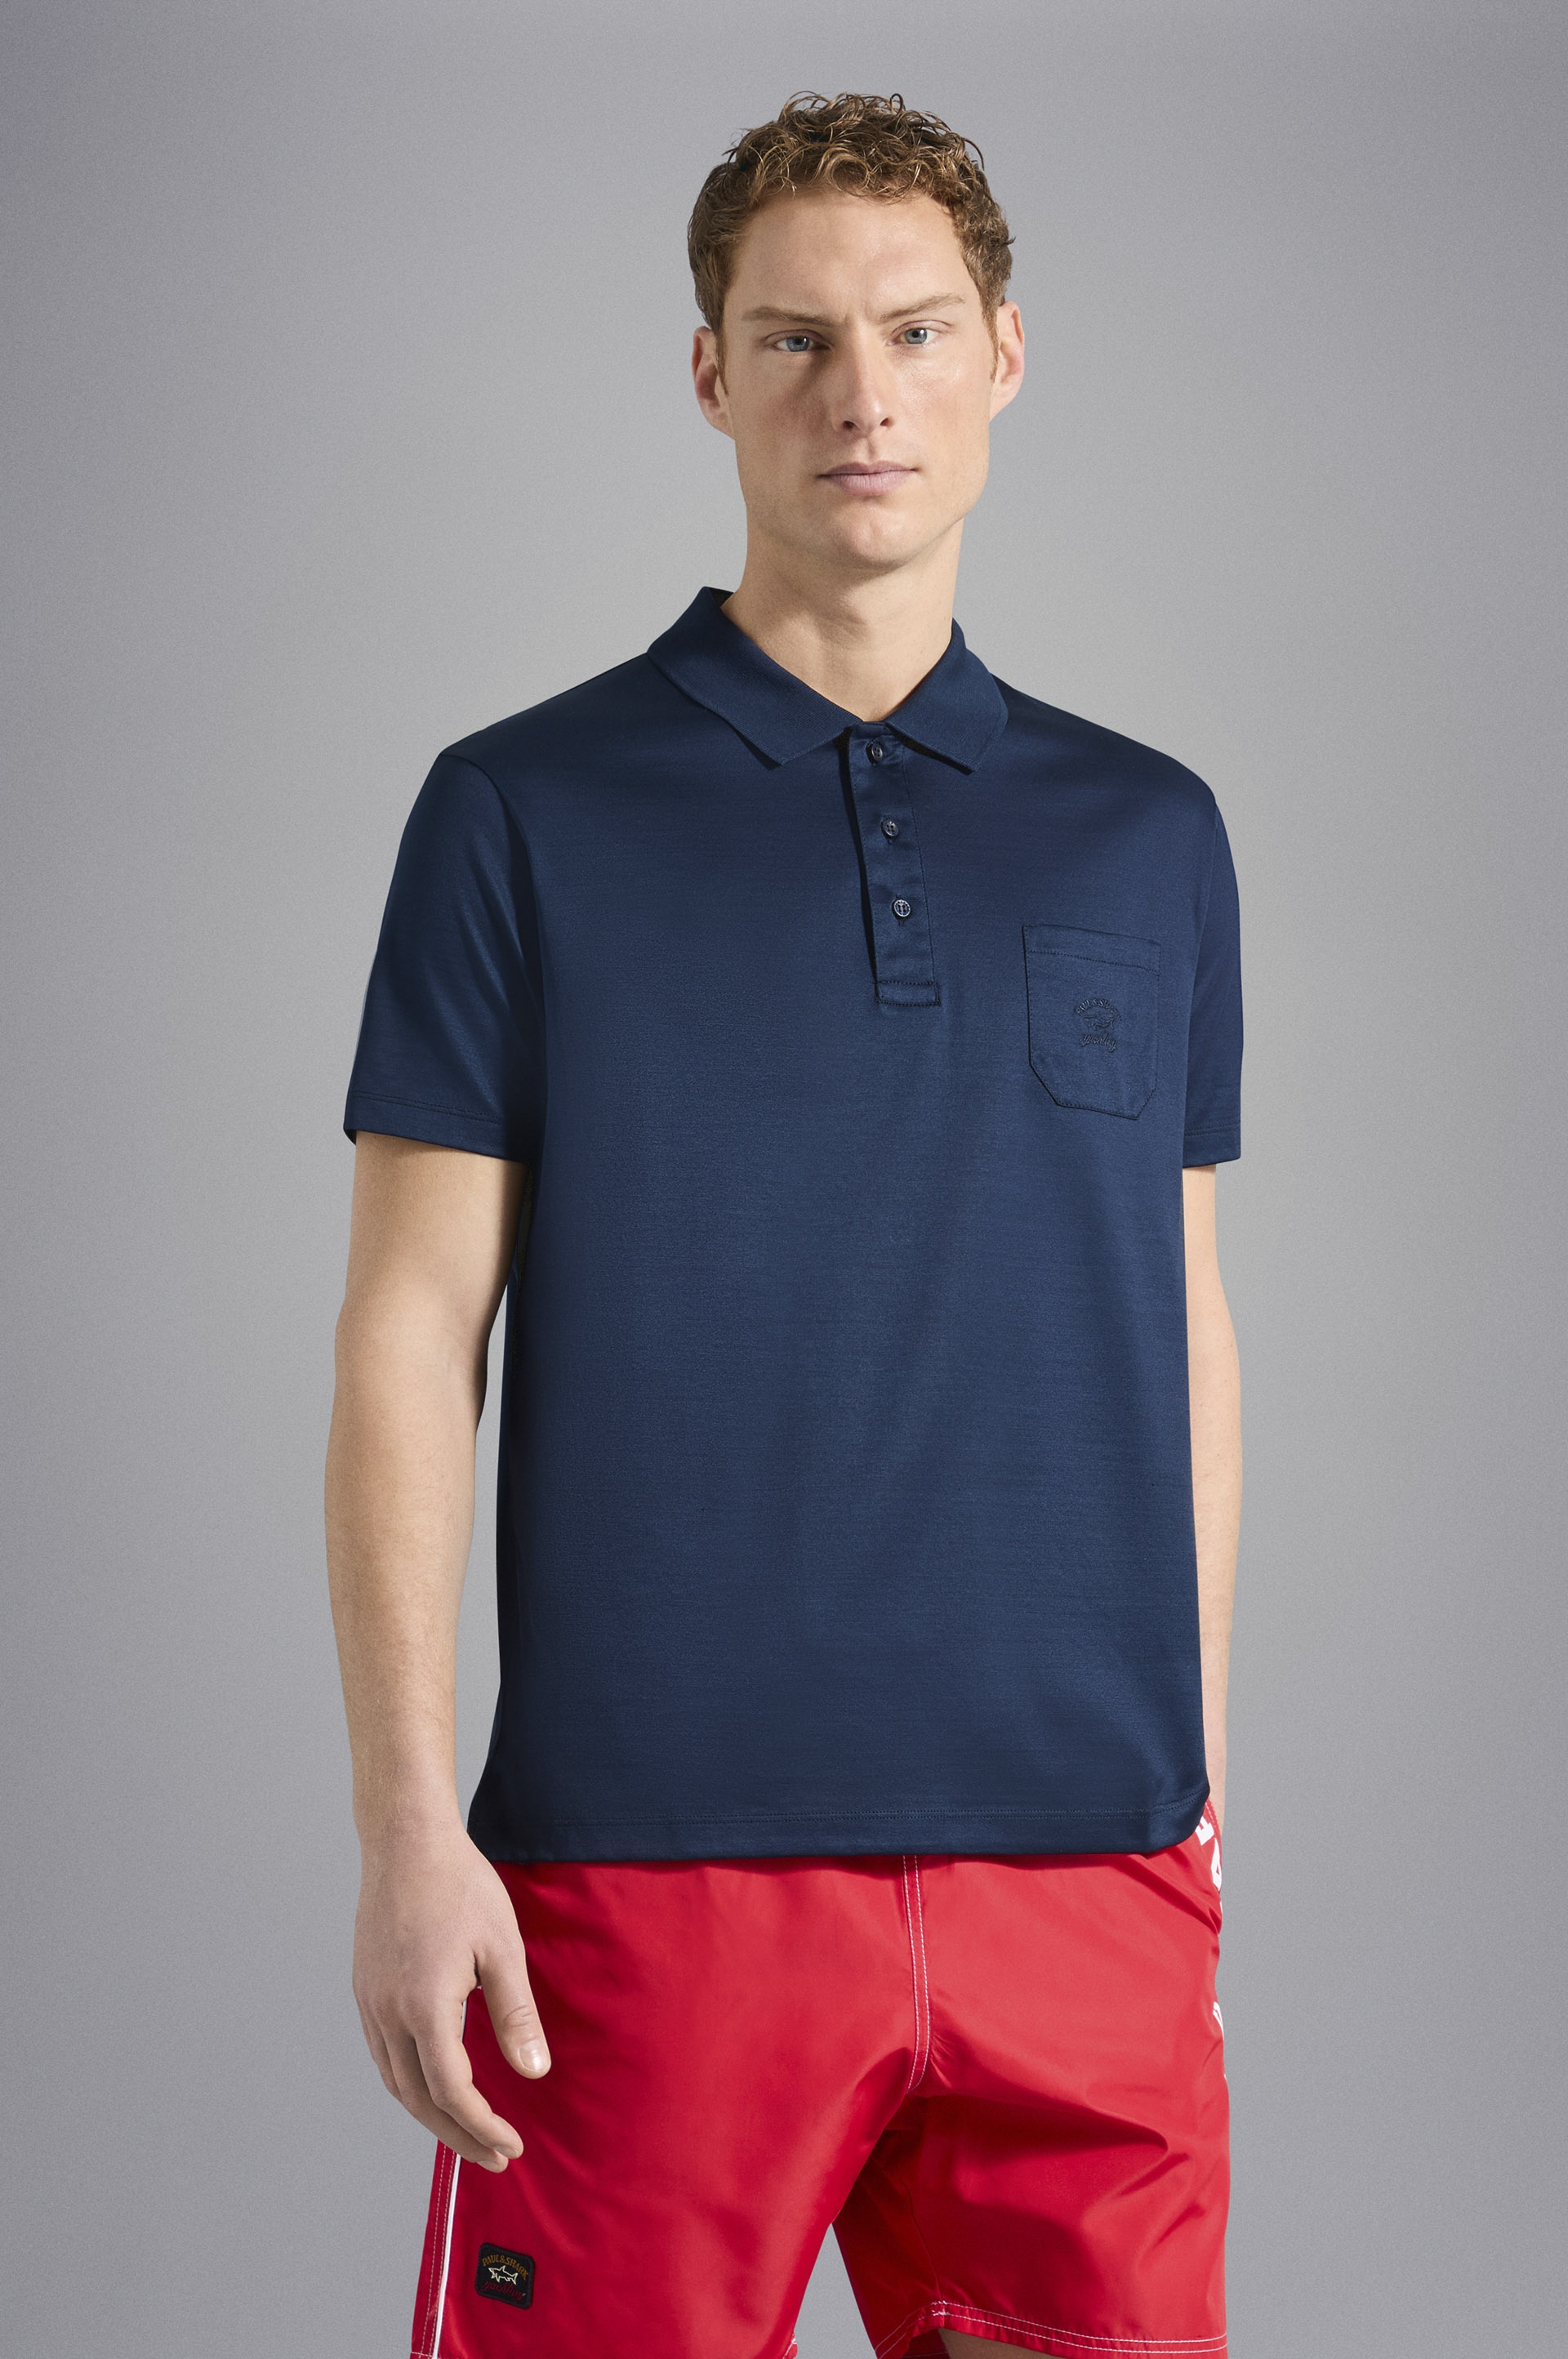 COTTON JERSEY POLO SHIRT WITH EMBROIDERED LOGO - 6